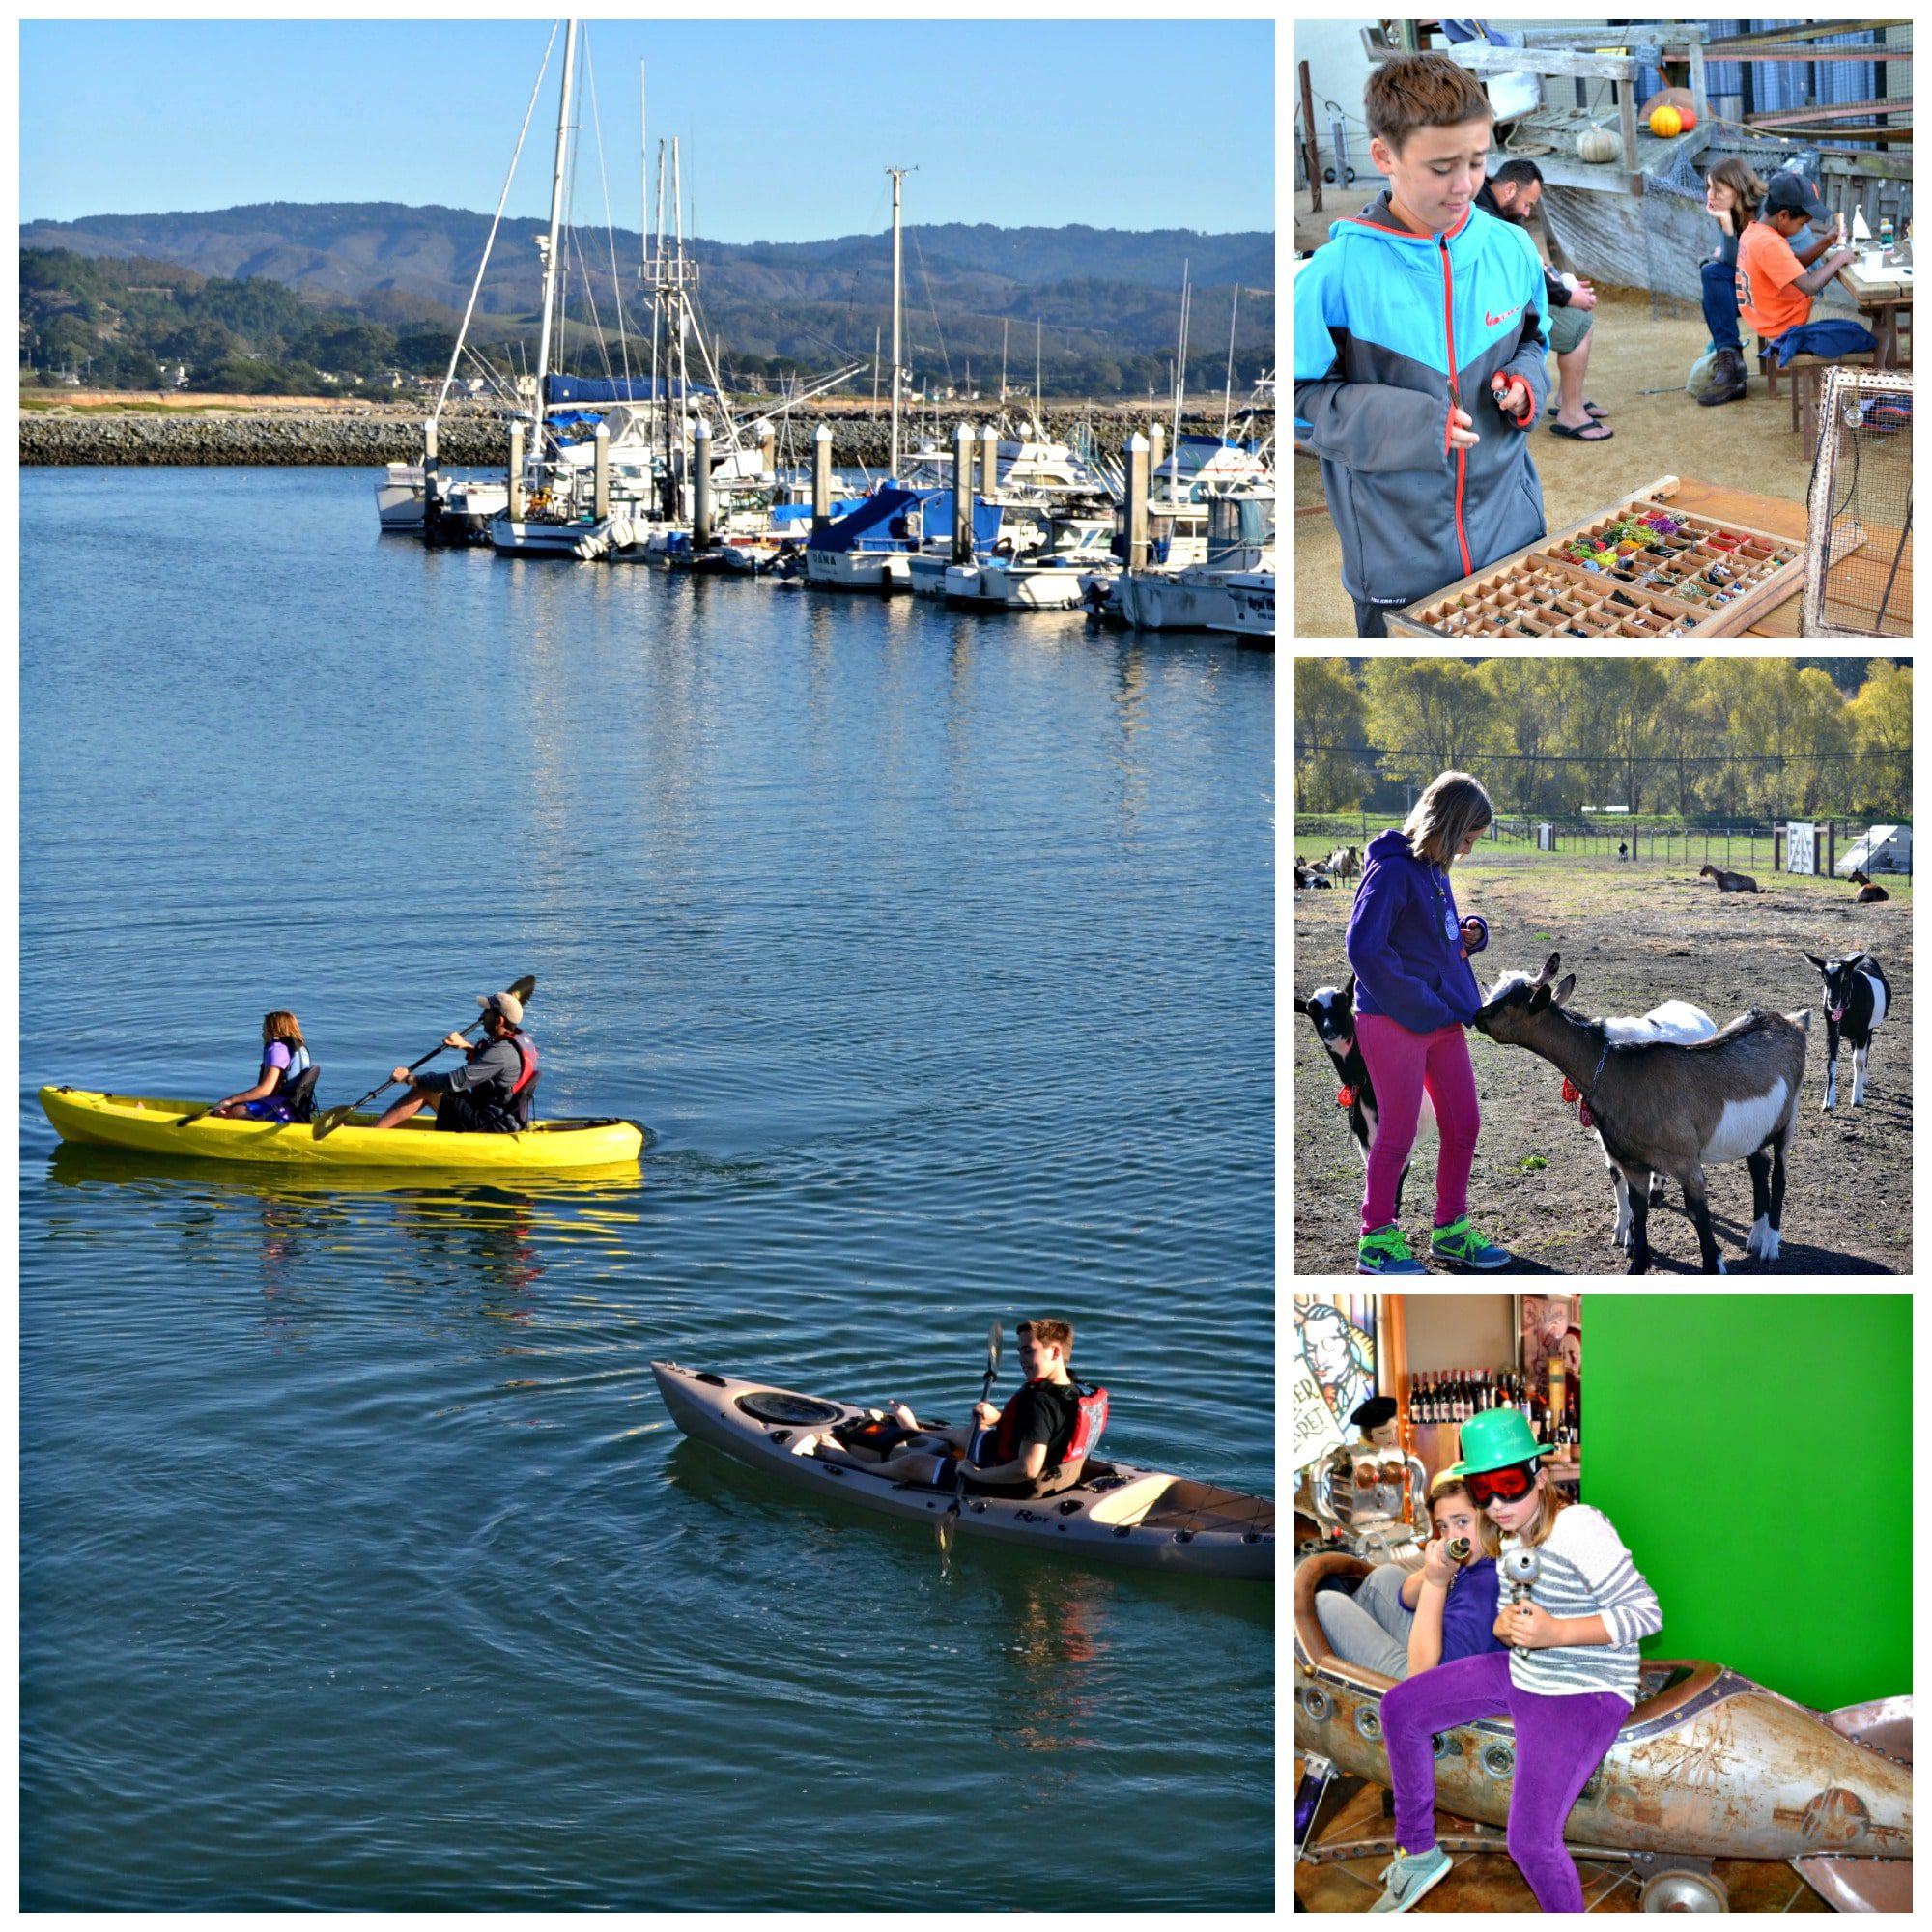 Half Moon Bay is full of adventures for families